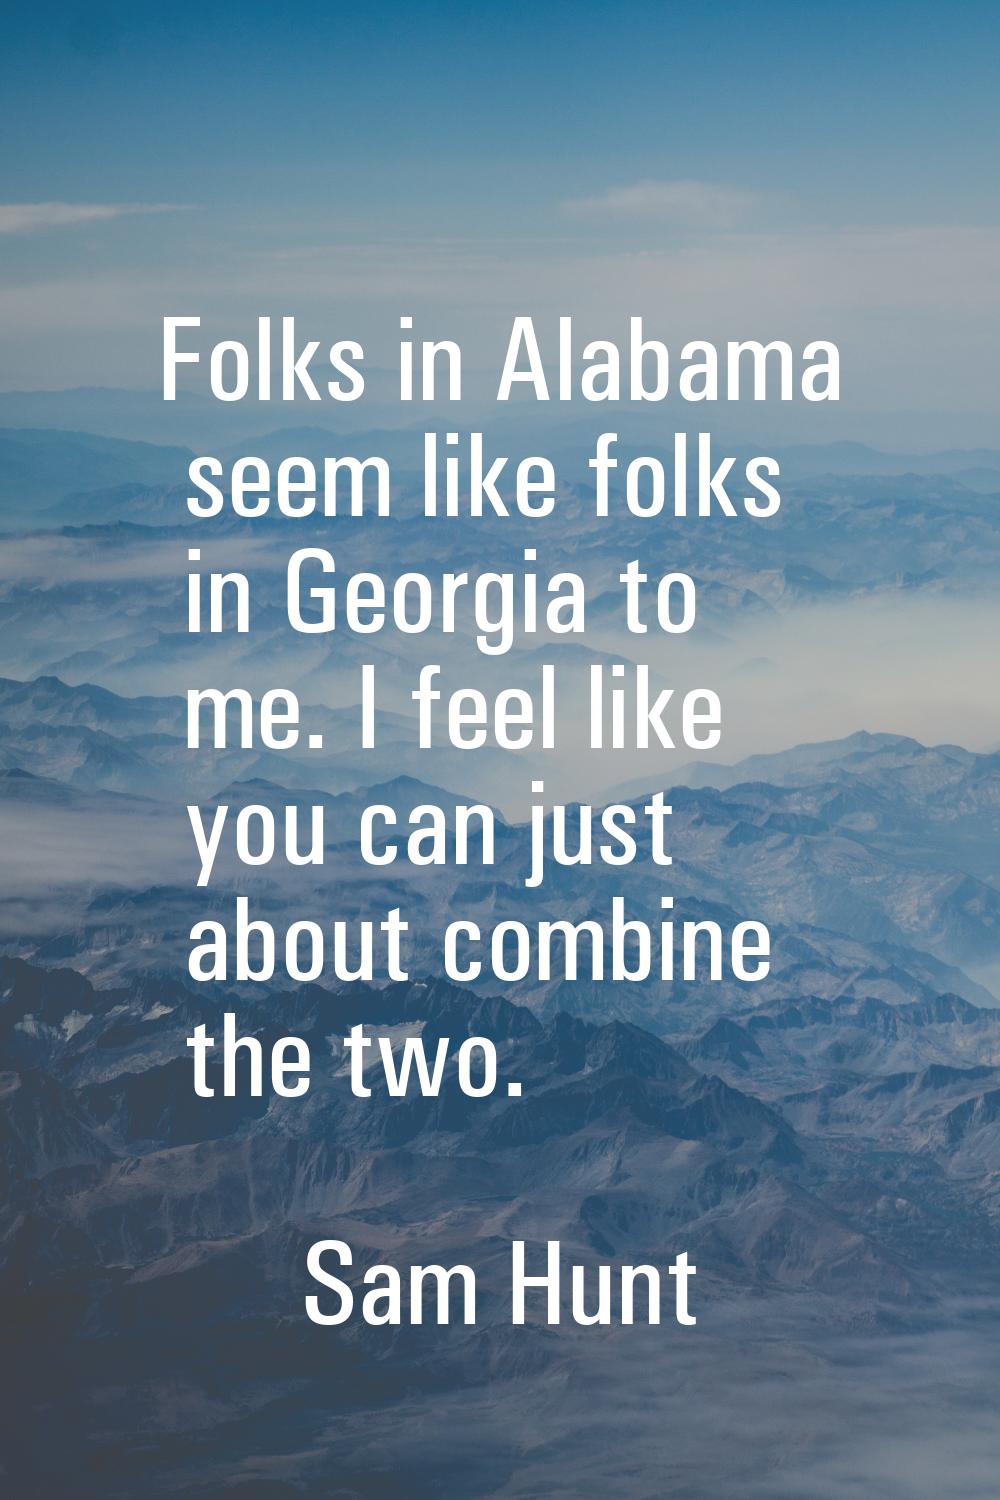 Folks in Alabama seem like folks in Georgia to me. I feel like you can just about combine the two.